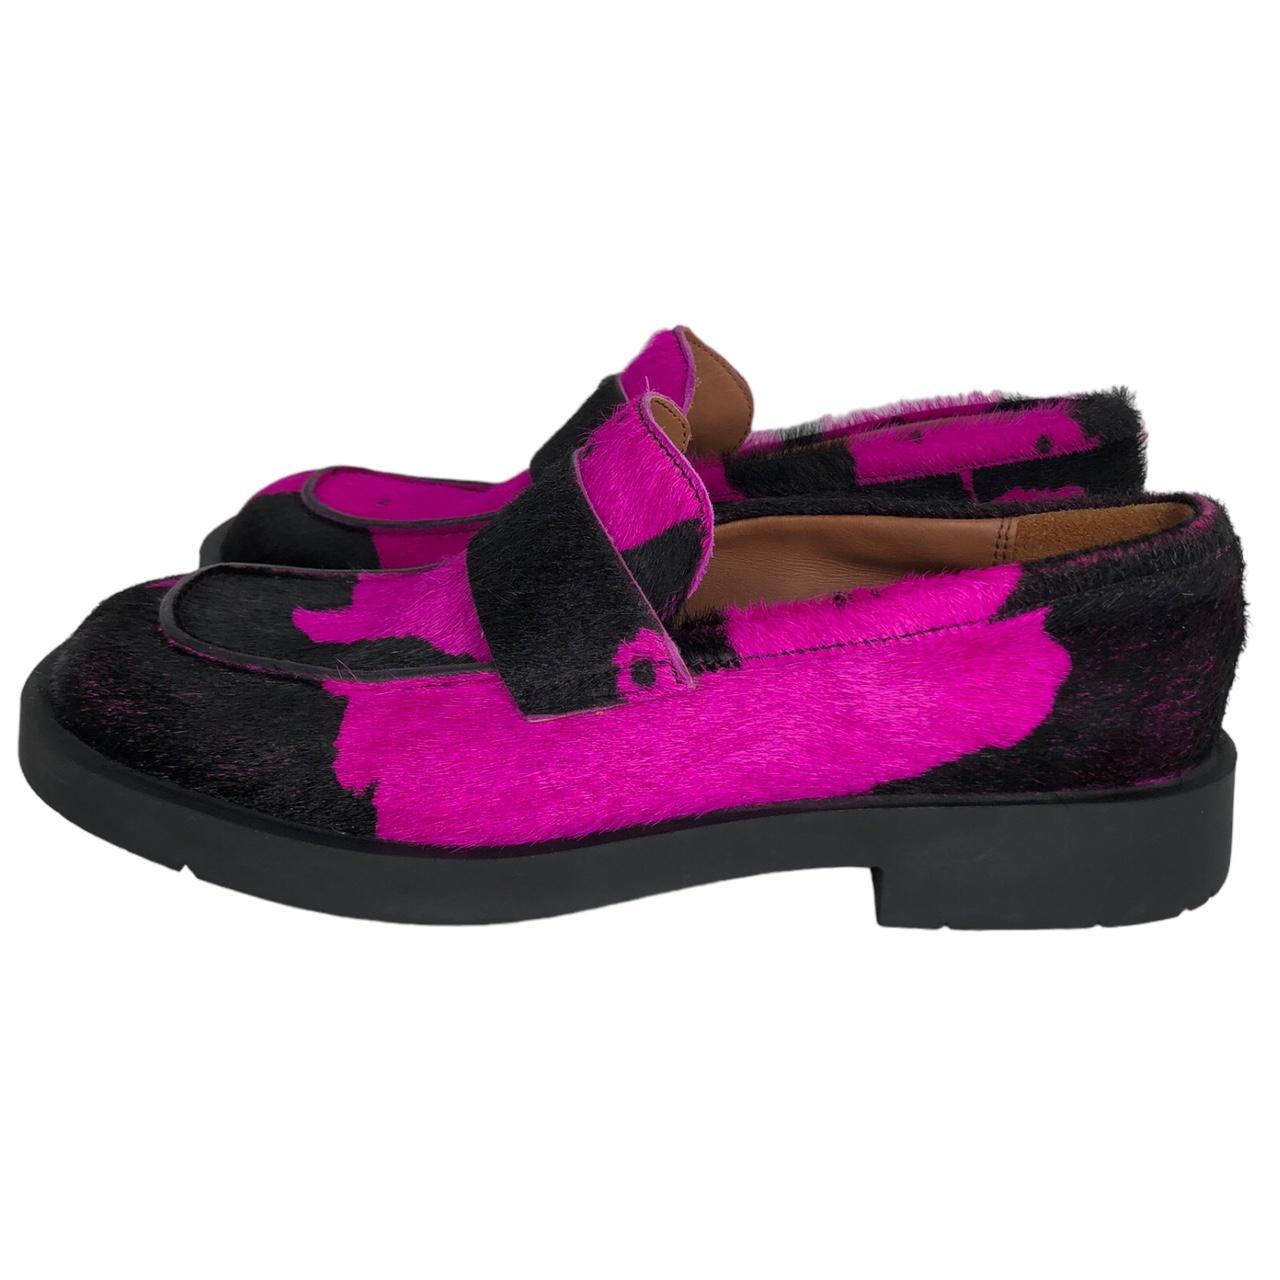 CamperLab Women's Pink and Black Loafers (4)